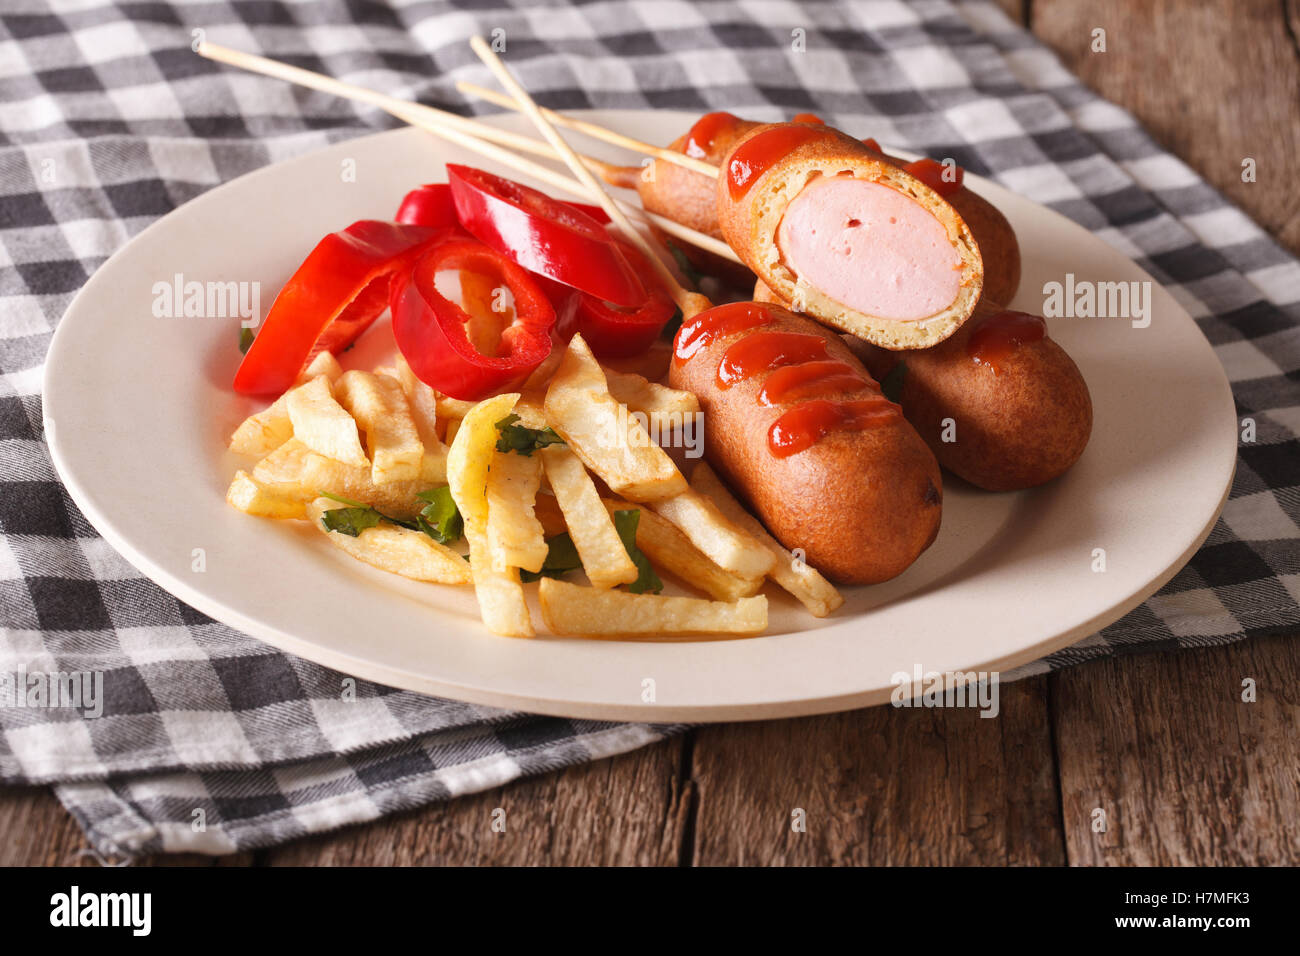 Fast food: corn dog and fries on a plate close-up on the table. horizontal Stock Photo